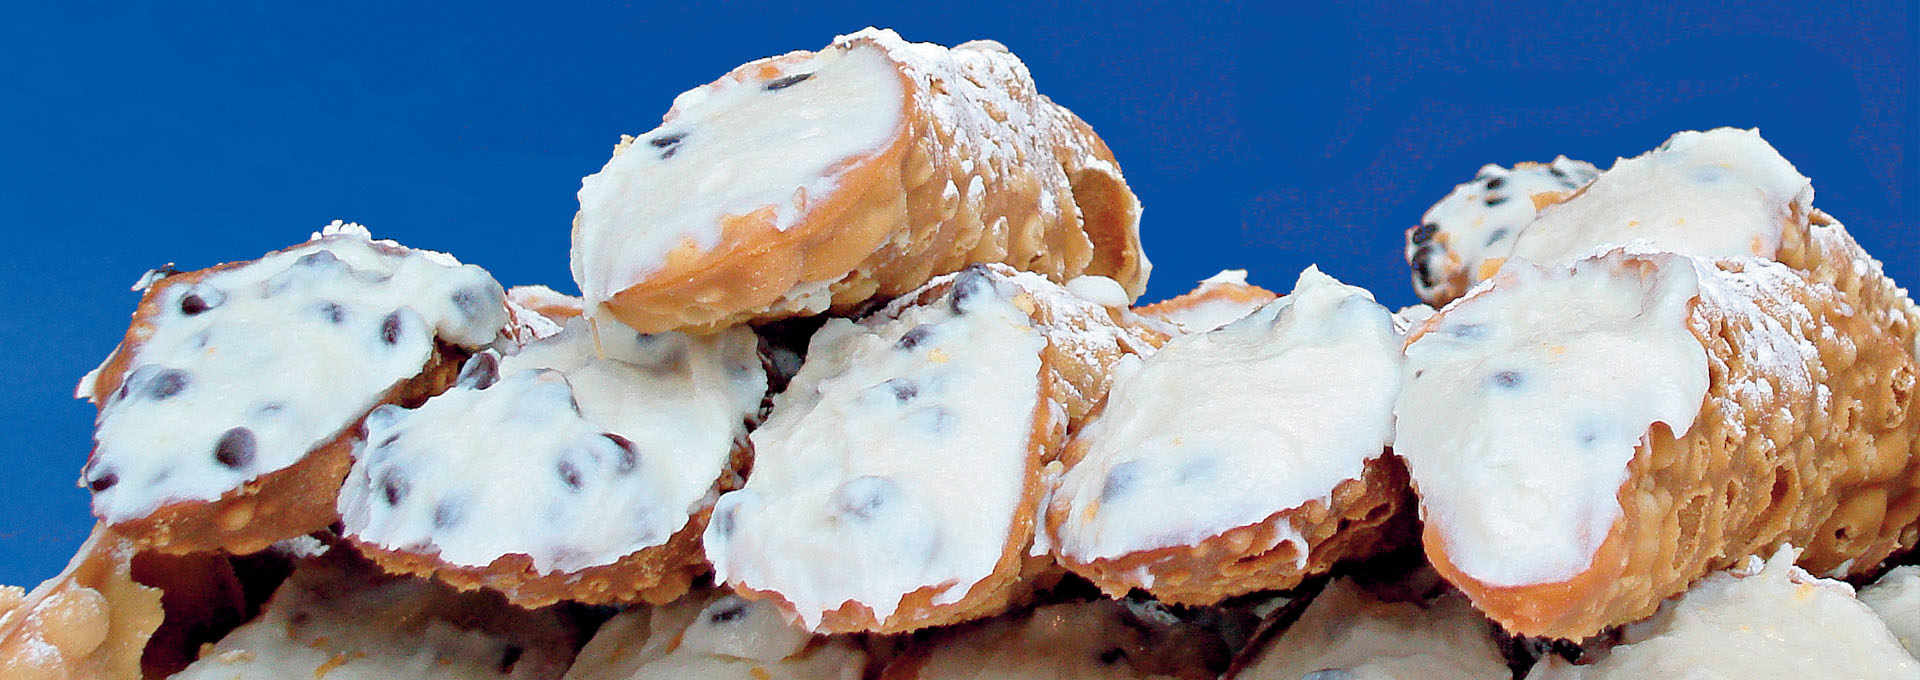 Cannolo: The Sweet Taste of Sicily